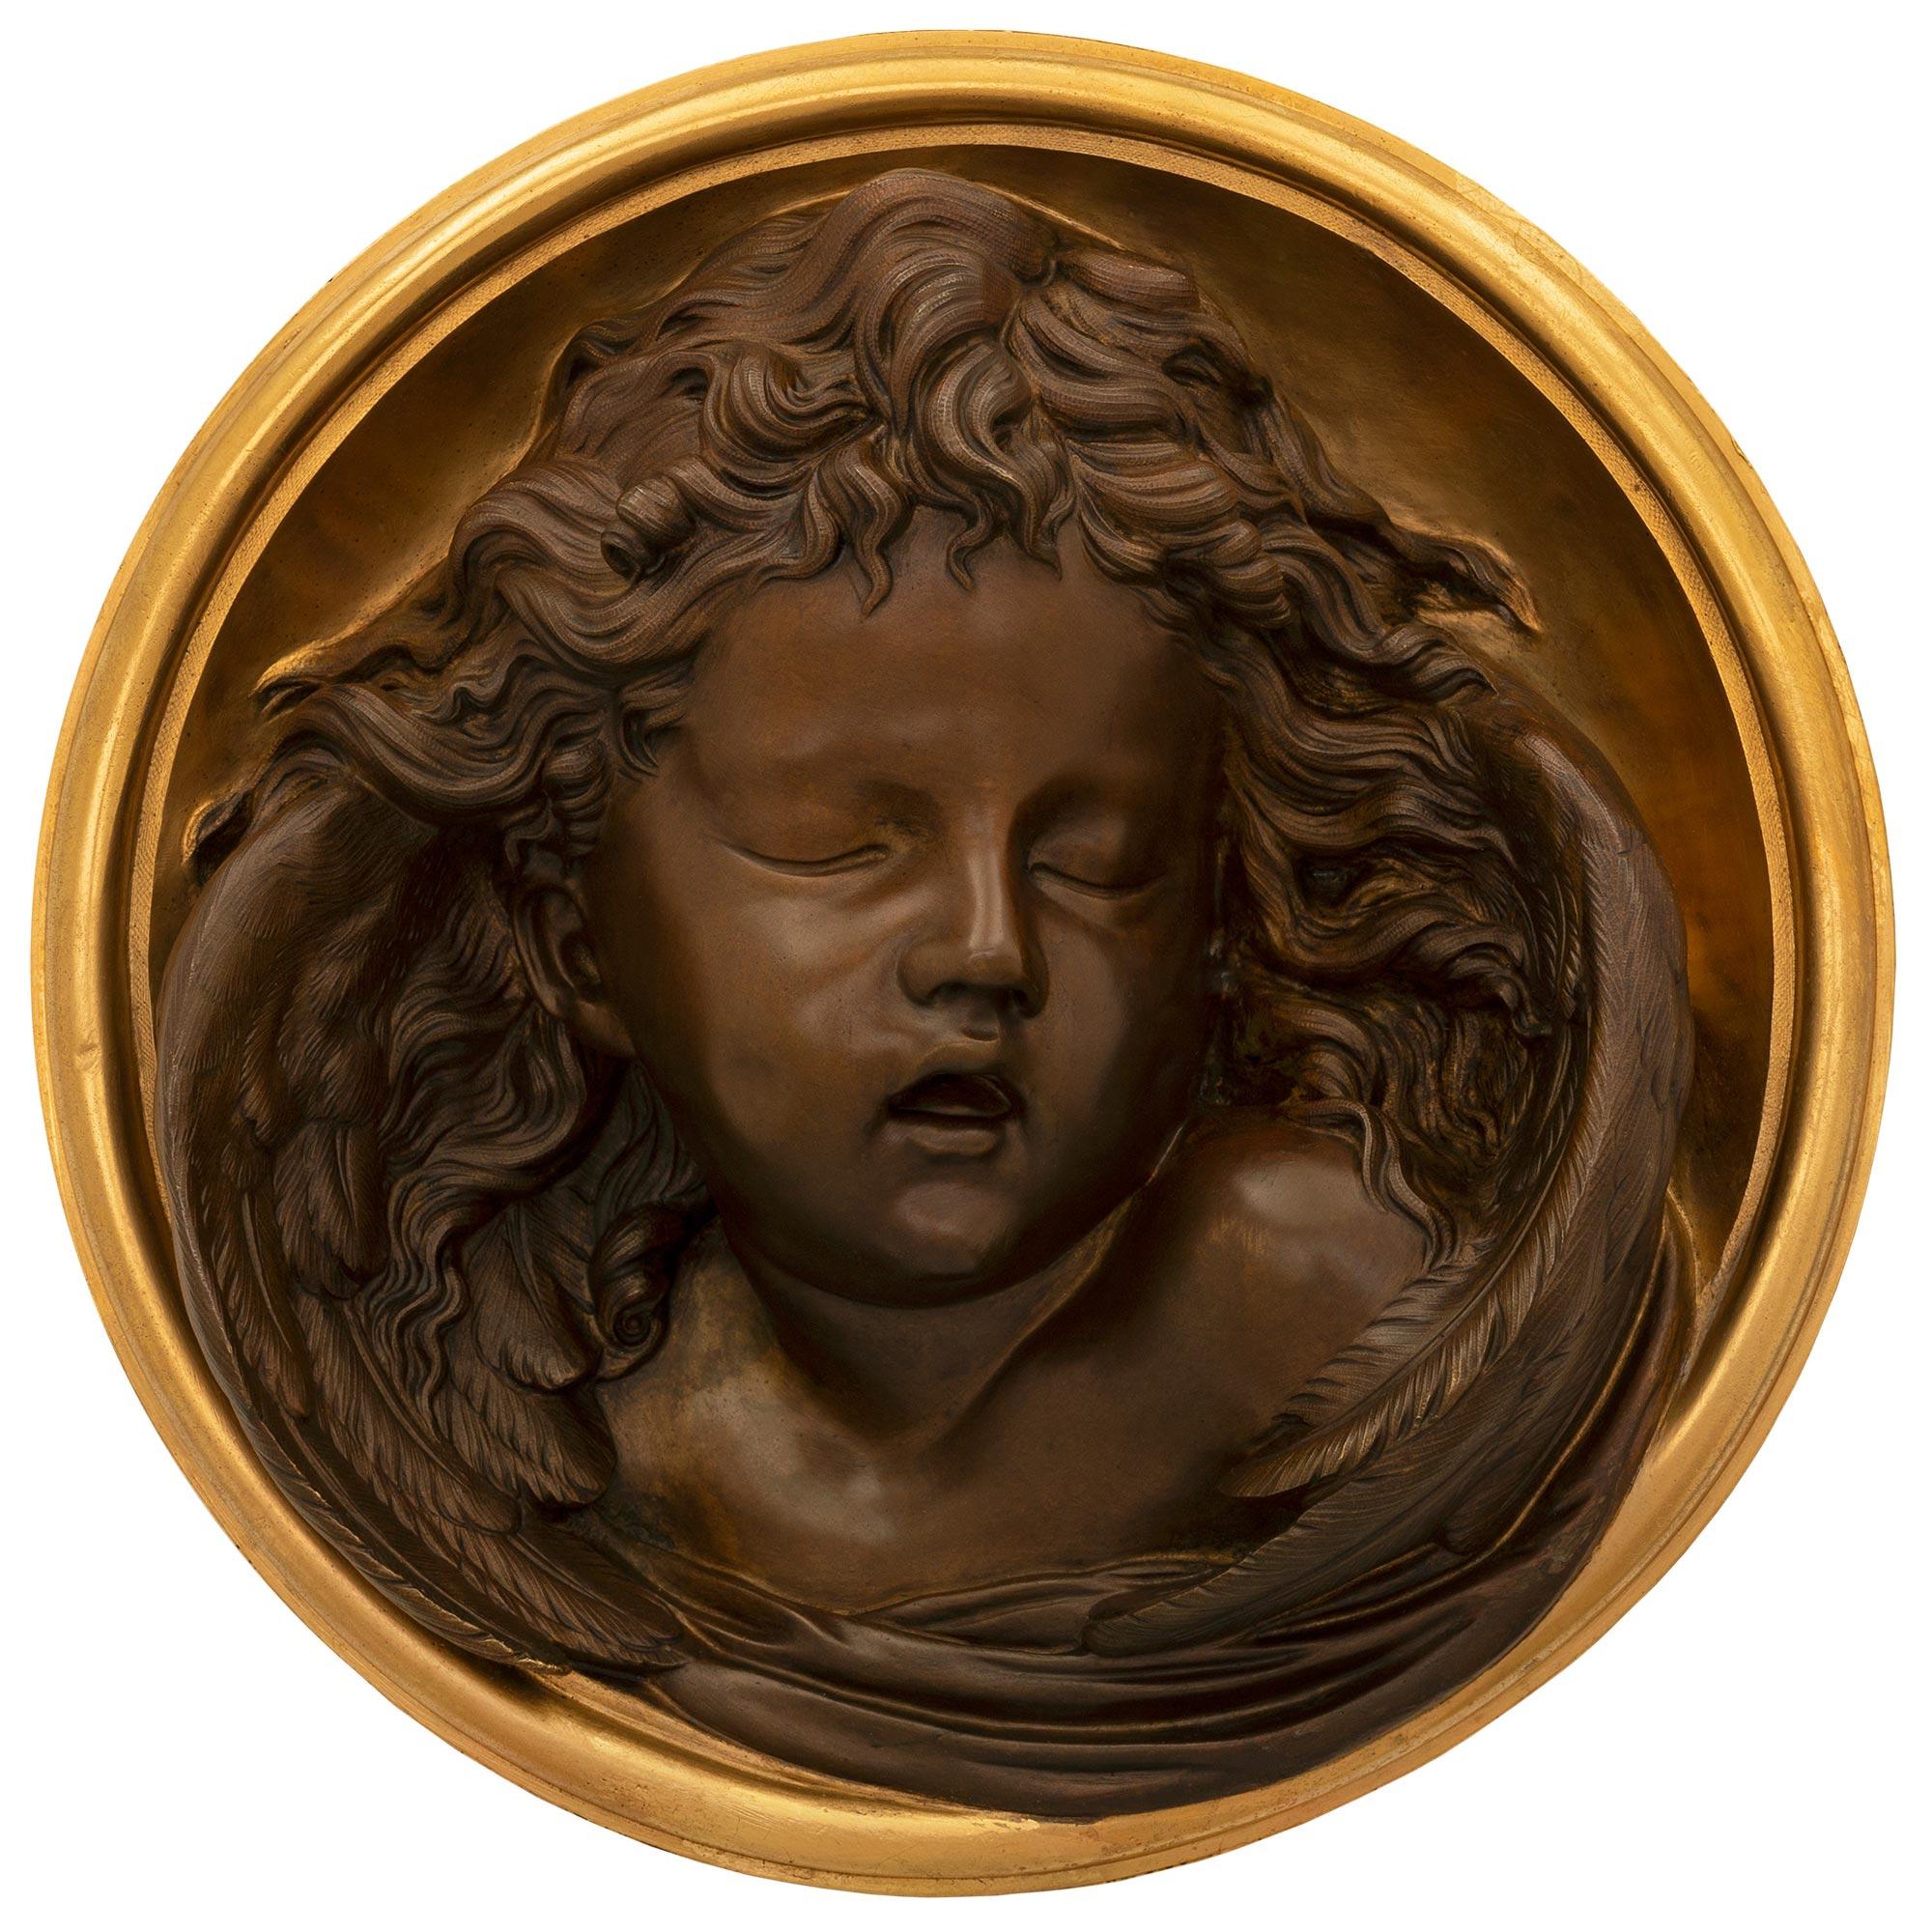 French 19th Century Belle Époque Period Patinated Bronze and Ormolu Wall Plaque For Sale 2